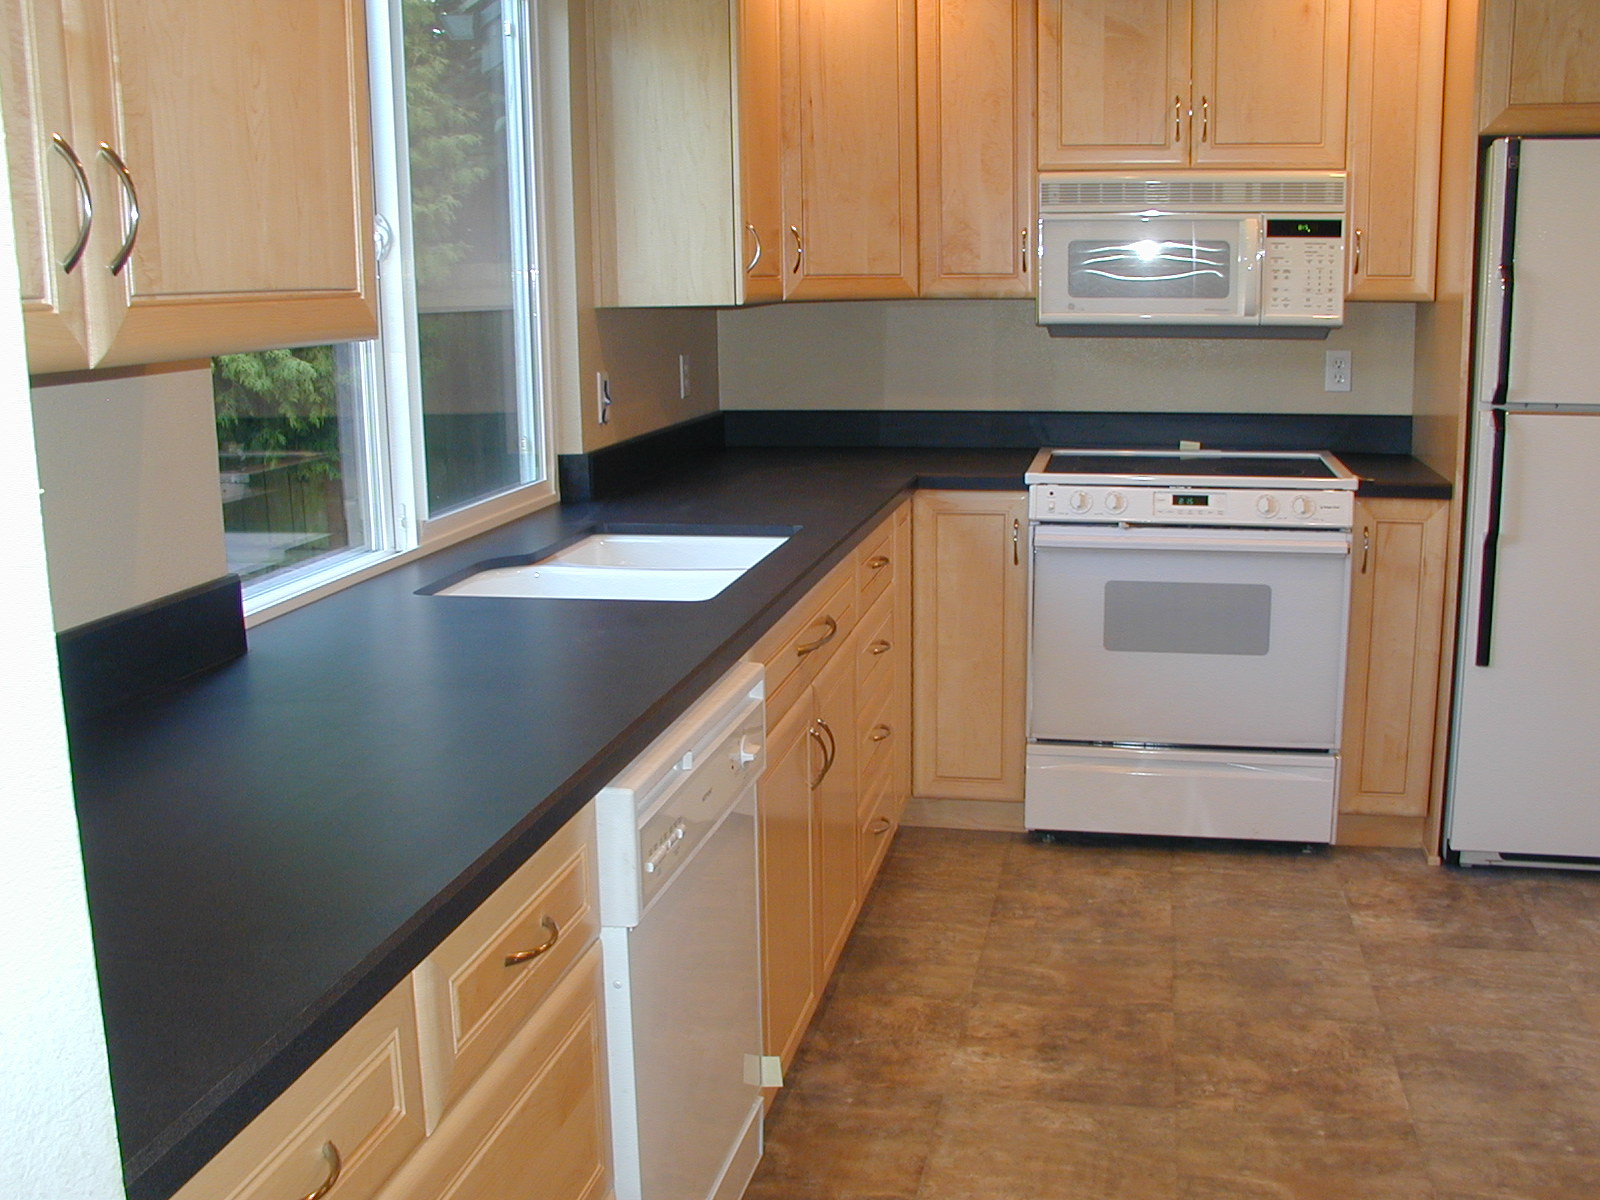 Inexpensive Kitchen Counter
 Inexpensive Kitchen Countertop to Consider – HomesFeed